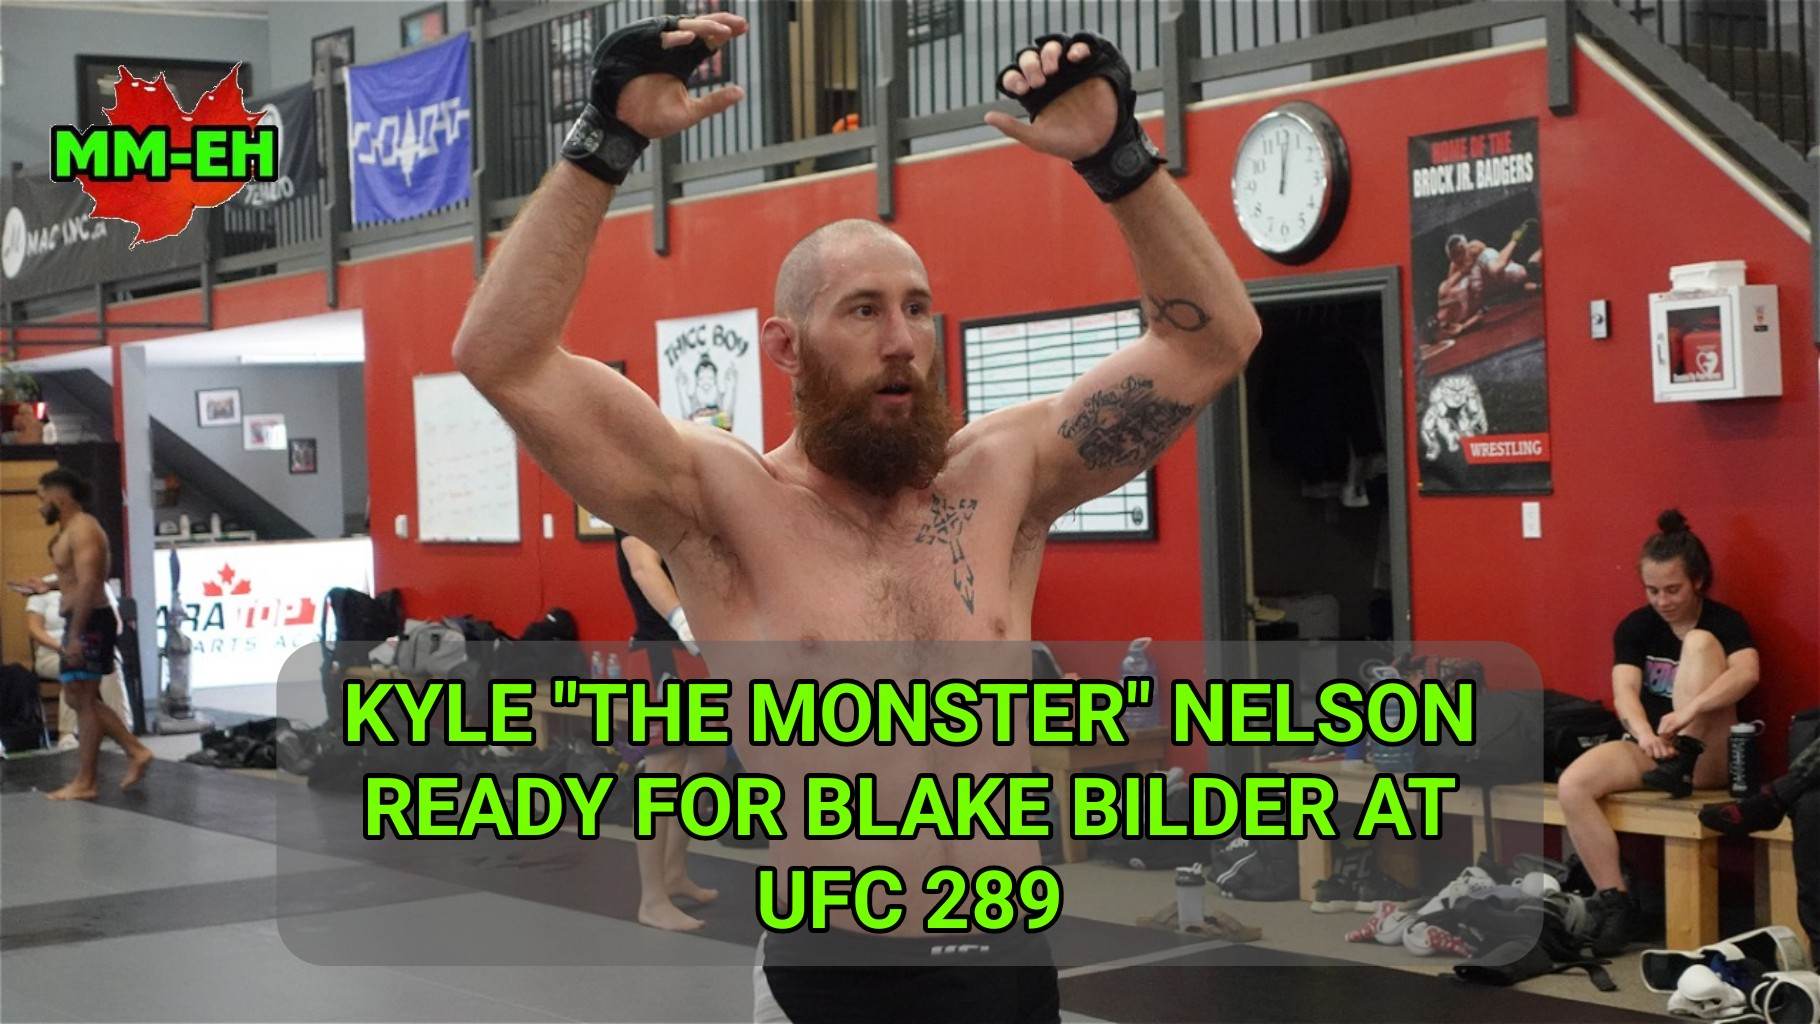 Kyle Nelson UFC 289 MM-EH